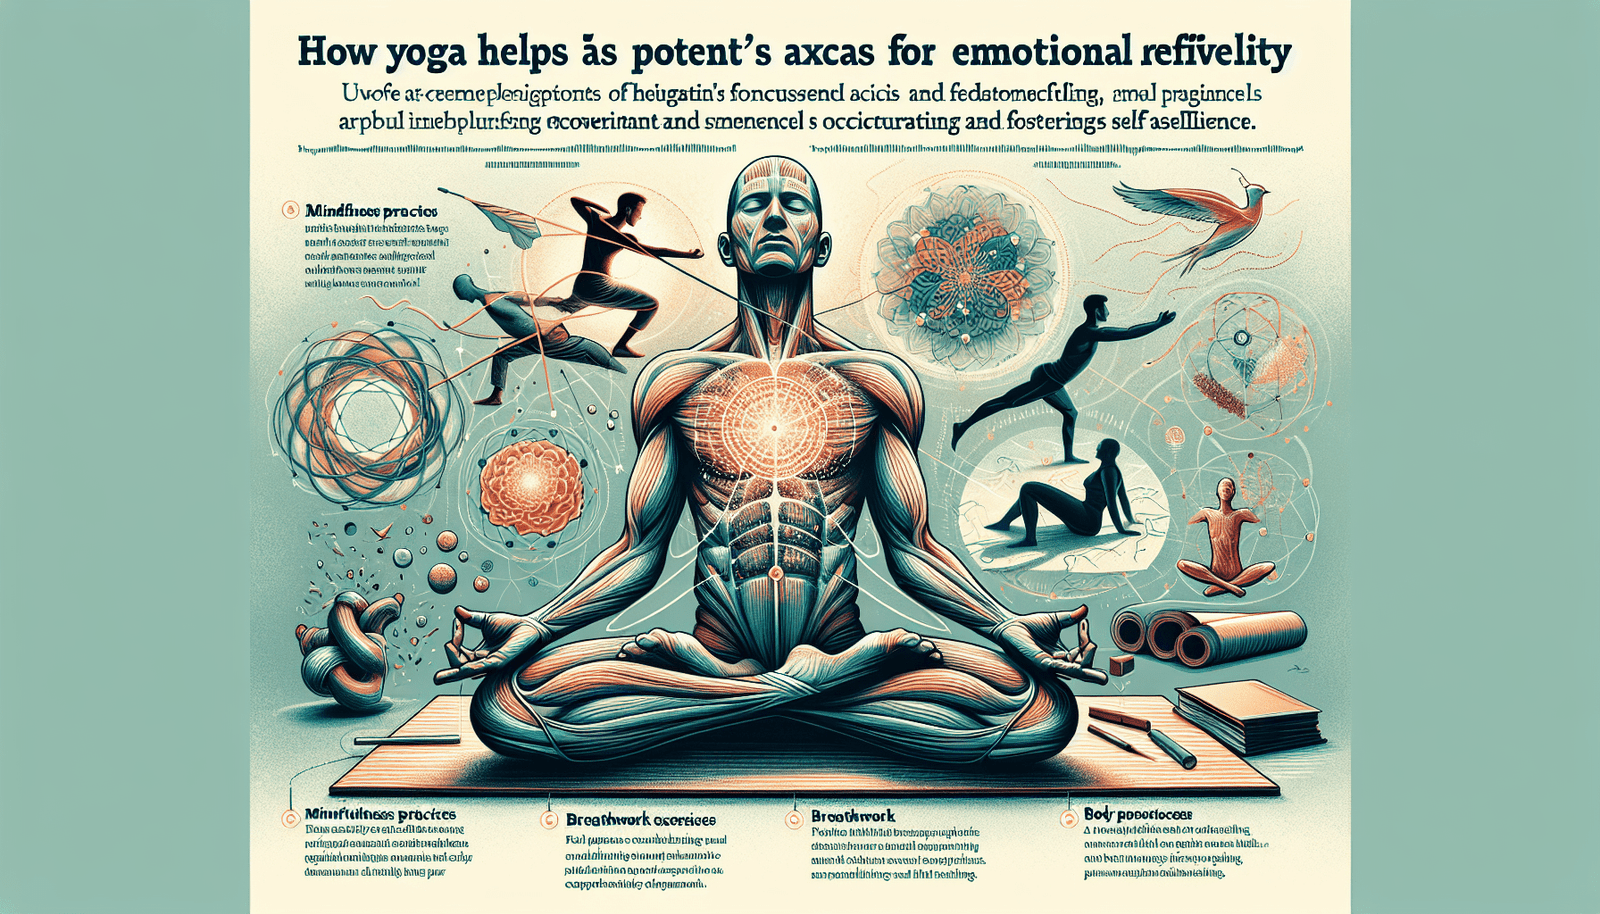 How Can Yoga Support Emotional Healing And Resilience?